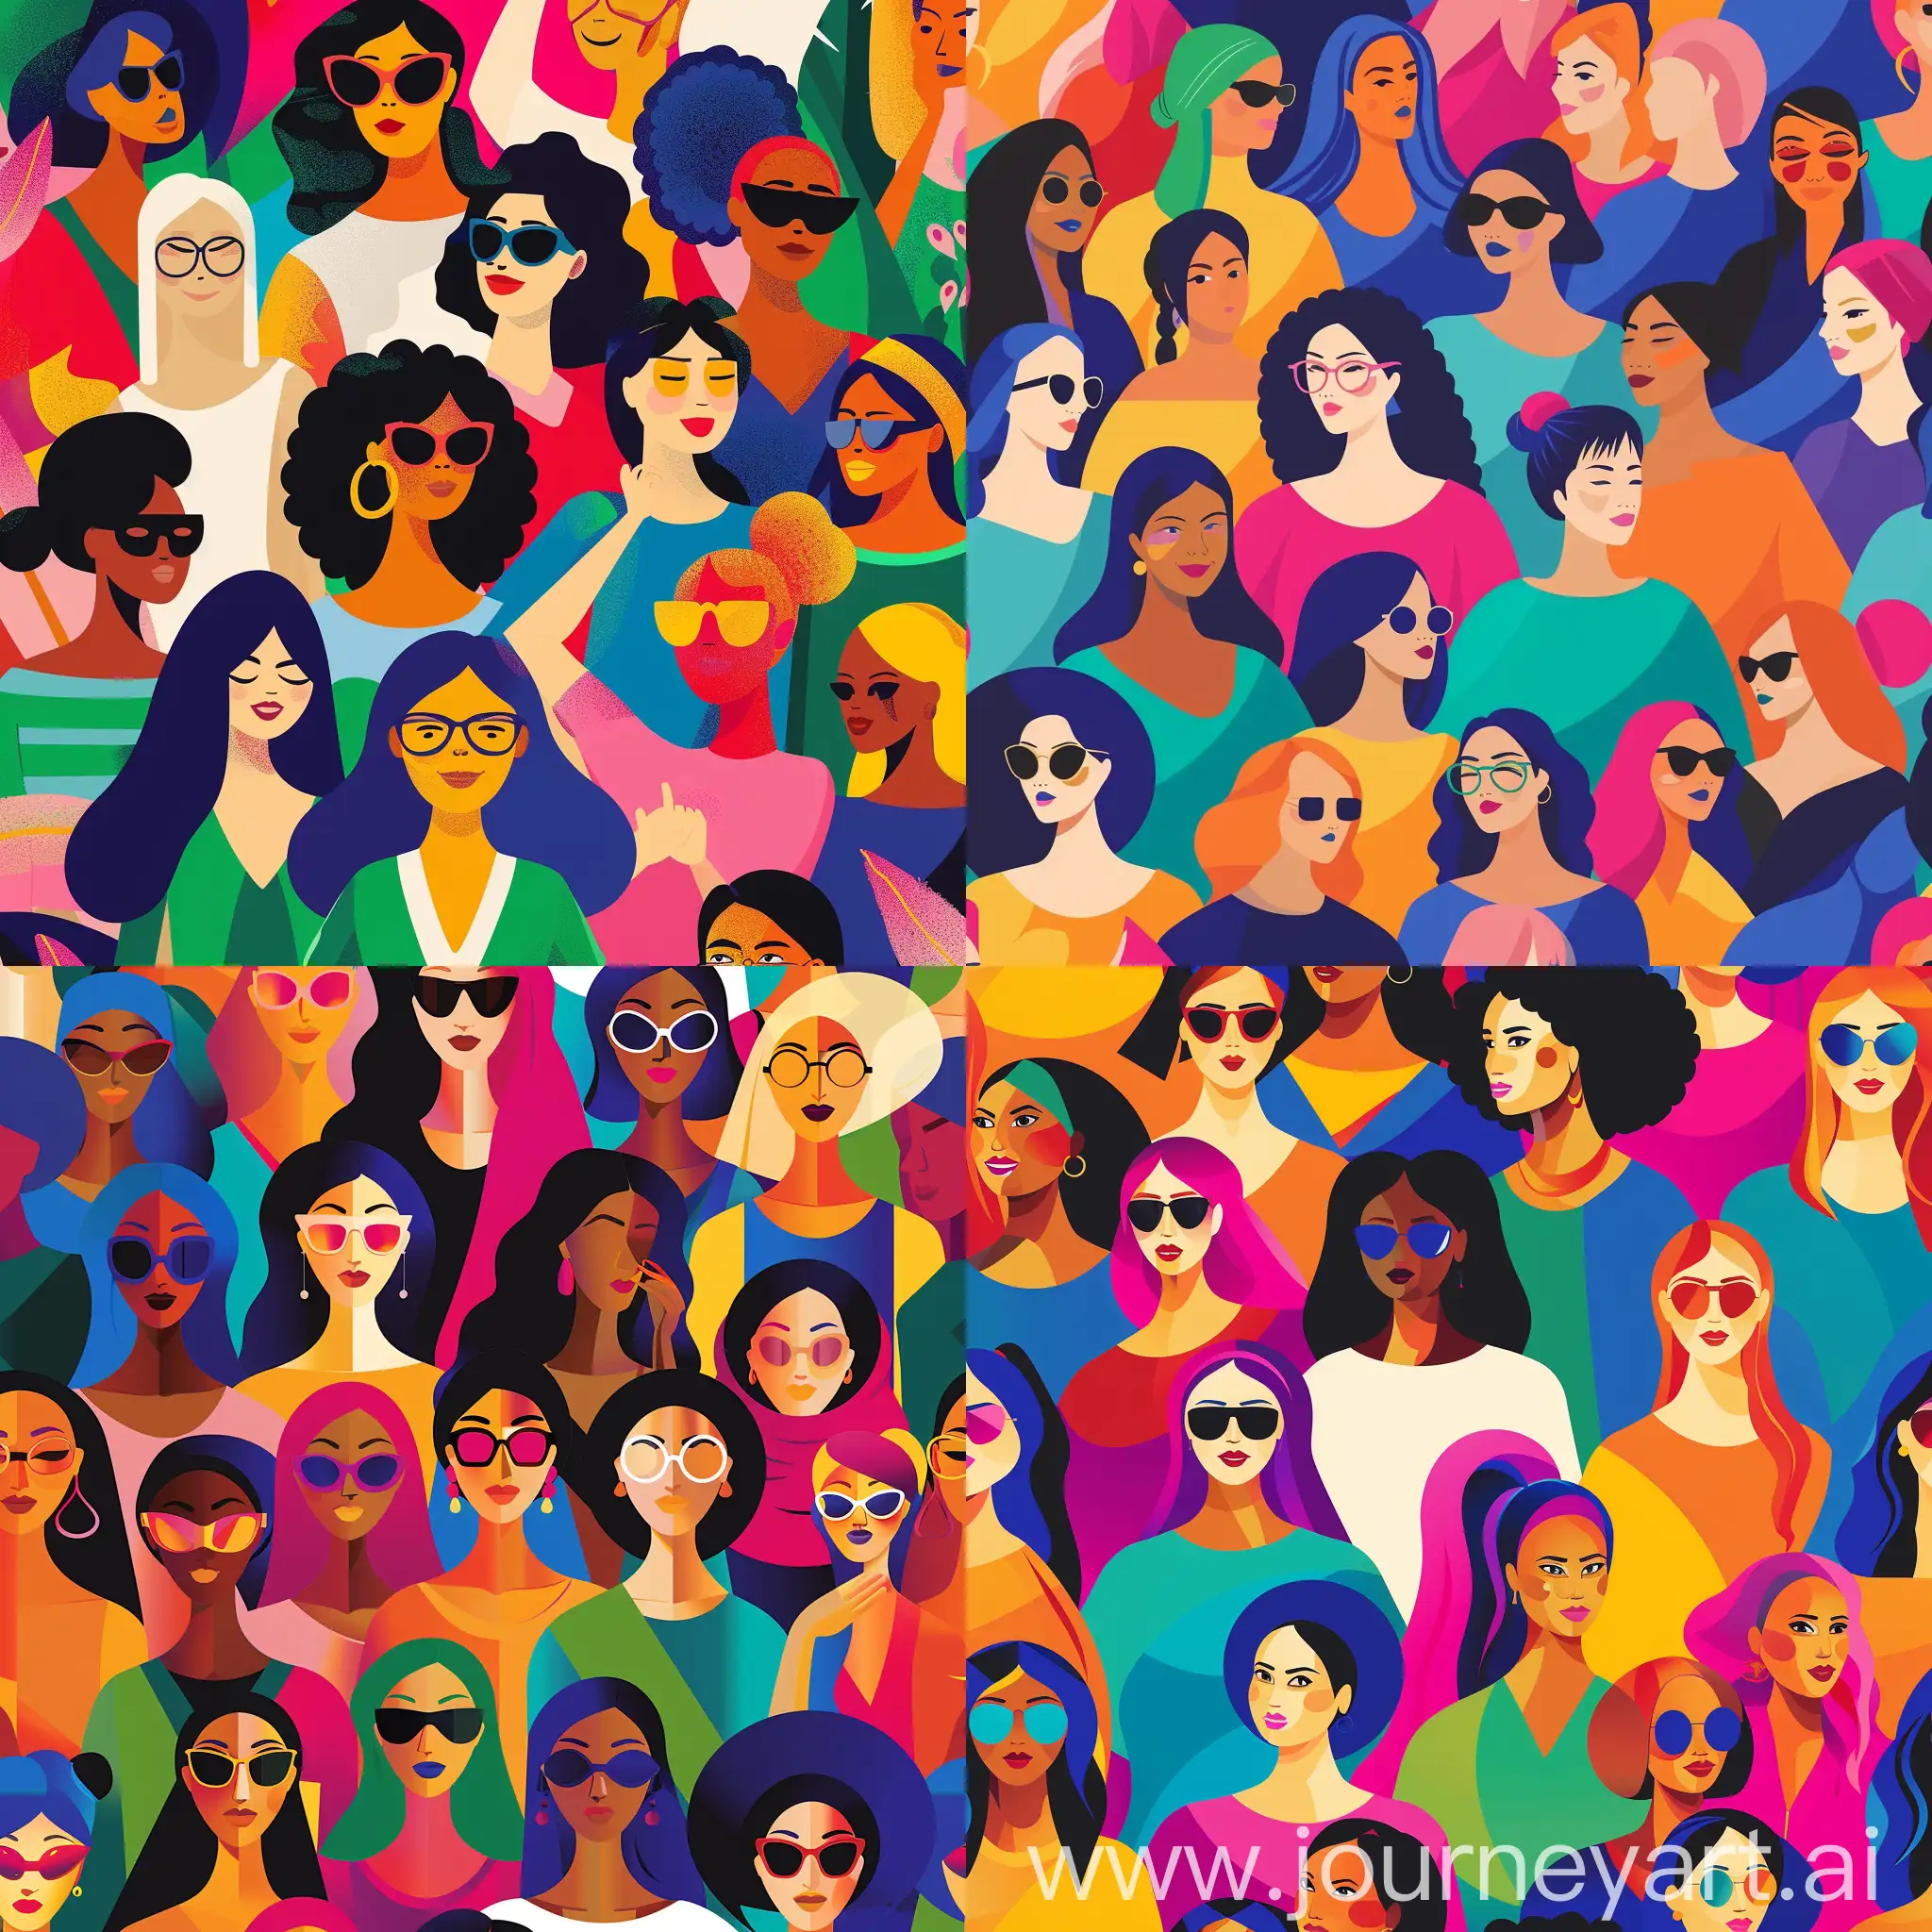 Background Image: A vibrant and colorful illustration of diverse women standing together, representing unity and empowerment.]